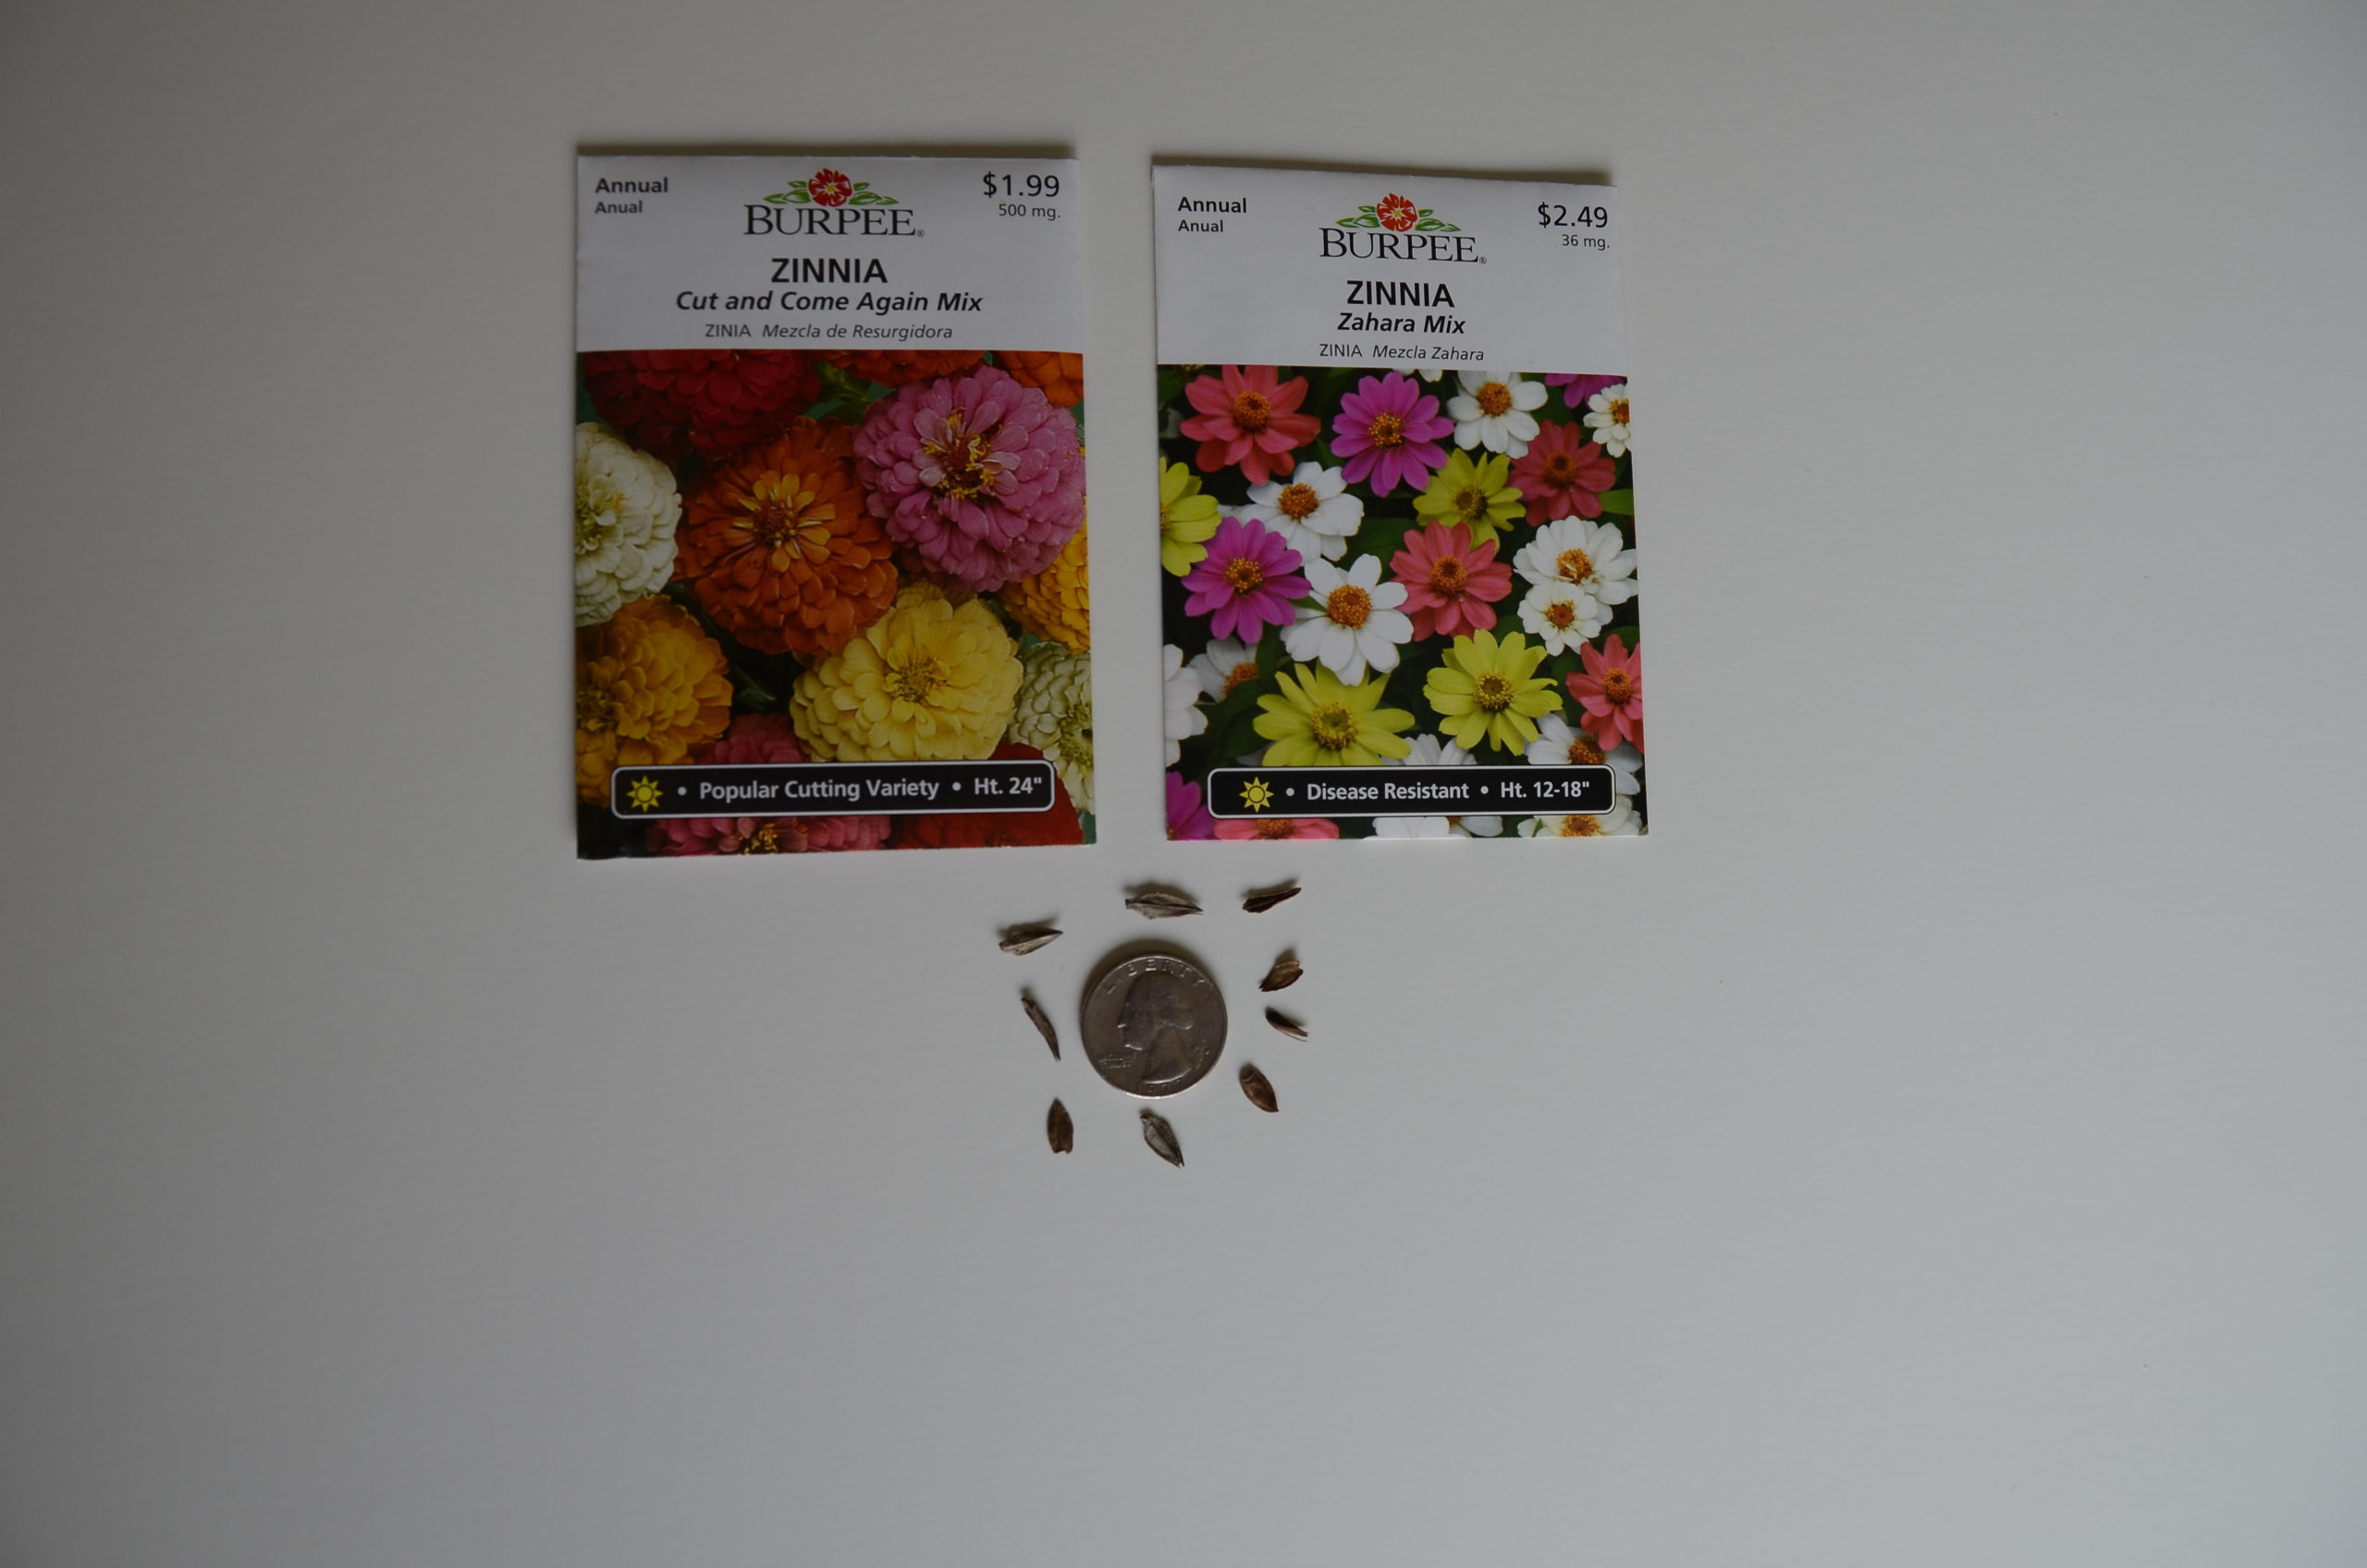 Zinnia seeds are large and easy to start, especially for kids, who can sow them right into the garden. You might find 10 to 15 varieties in cell packs at local garden centers, but online seed vendors often offer 50 varieties that you can grow from seed.